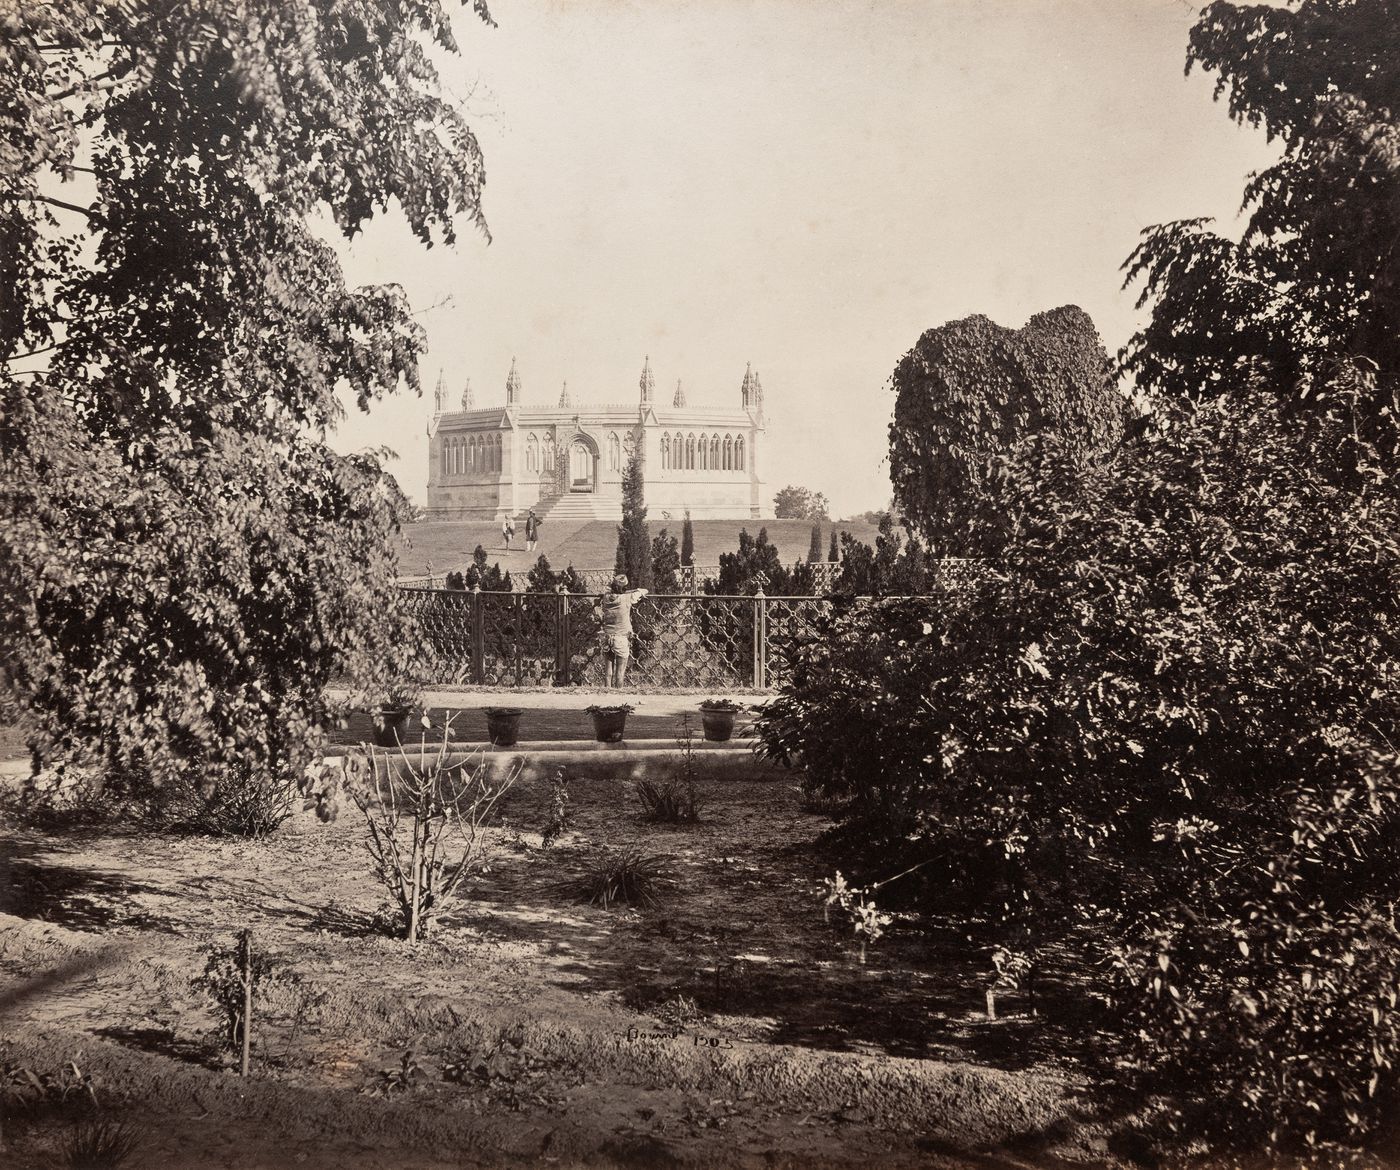 View of the Municipal Gardens (also known as the Memorial Well Gardens) and the Memorial Well, Cawnpore (now Kanpur), India